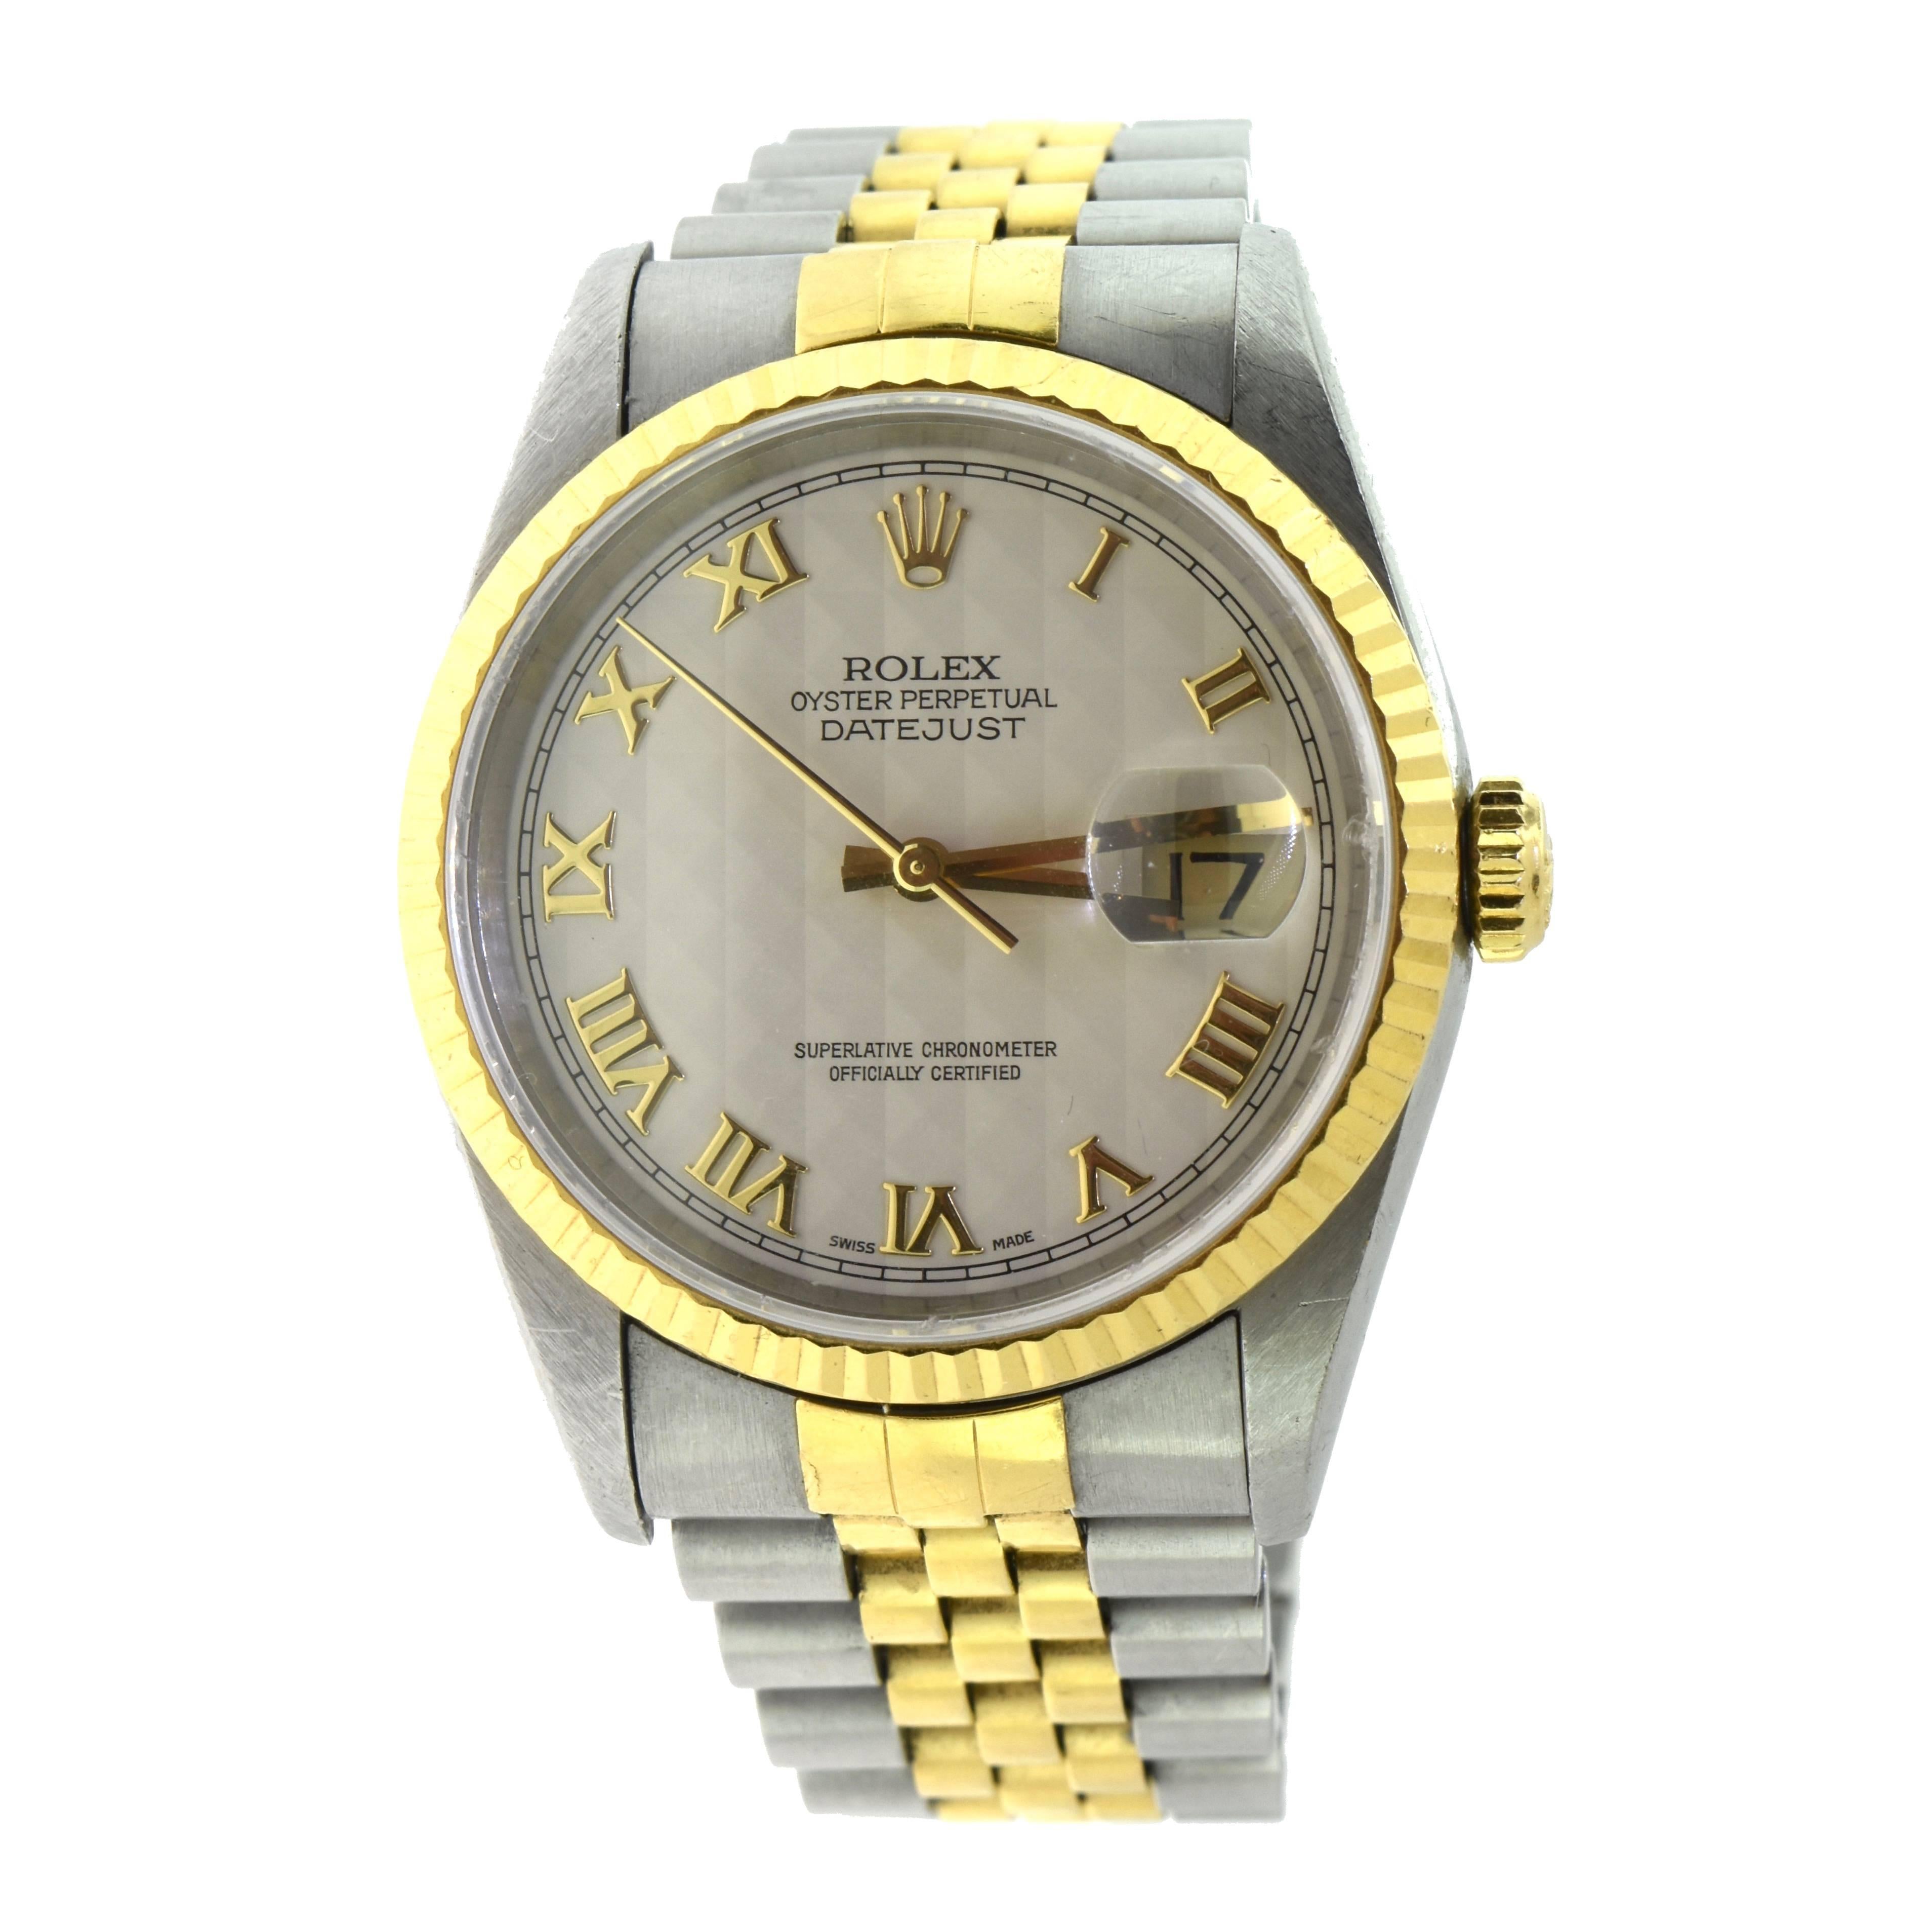 Rolex Datejust Two Tone Gold or Steel Ivory Pyramid Roman Dial Model 16233 Watch For Sale